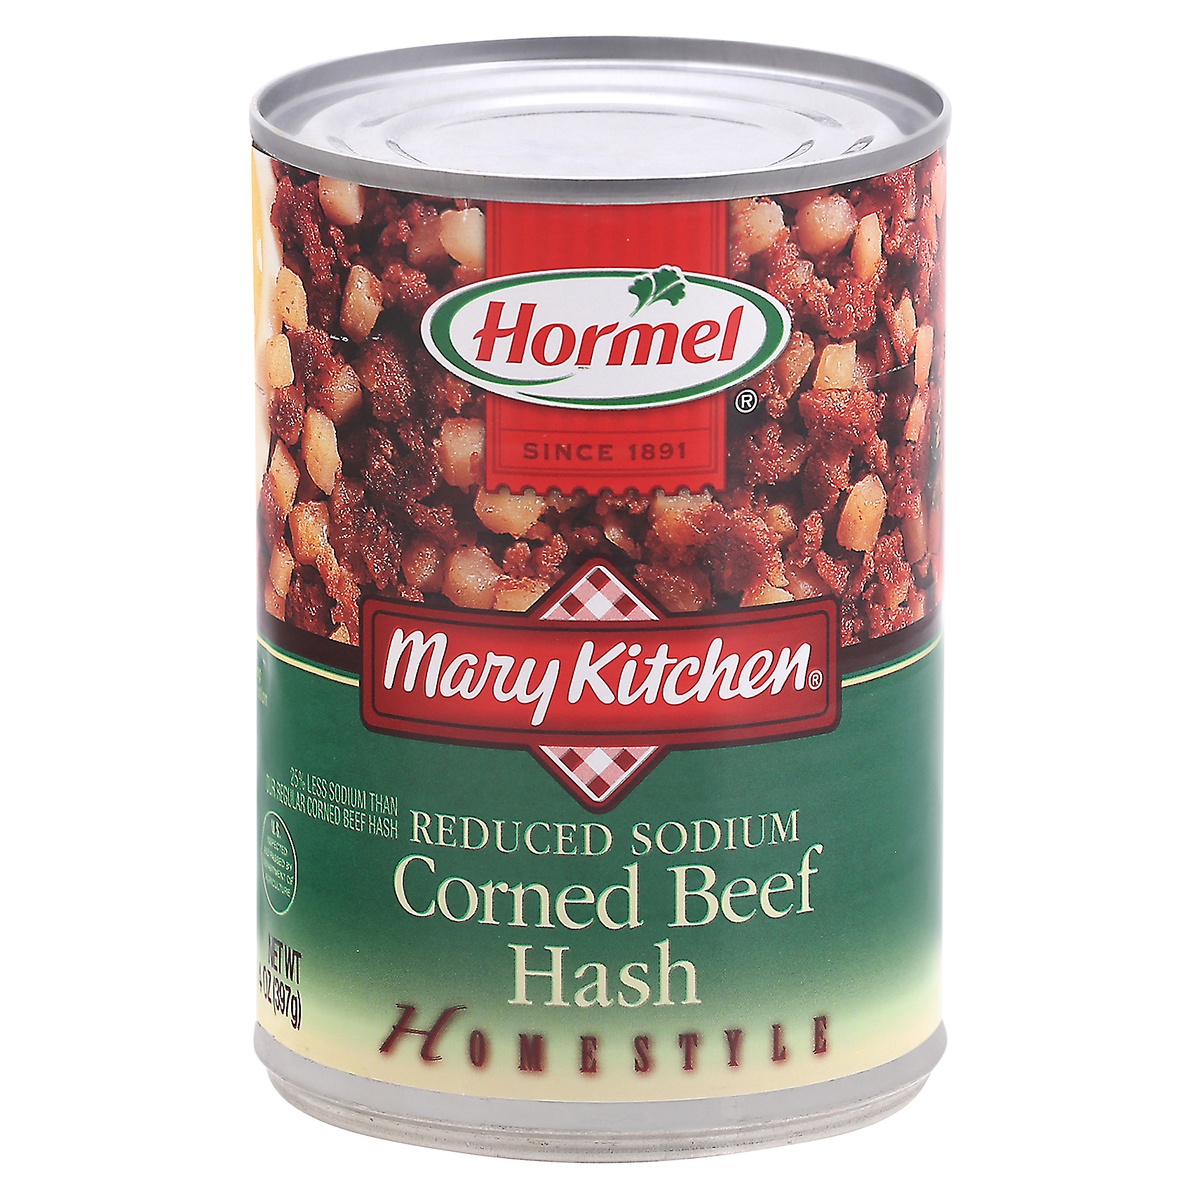 slide 1 of 1, Hormel Mary Kitchen Reduced Sodium Homestyle Corned Beef HashCan, 14 oz